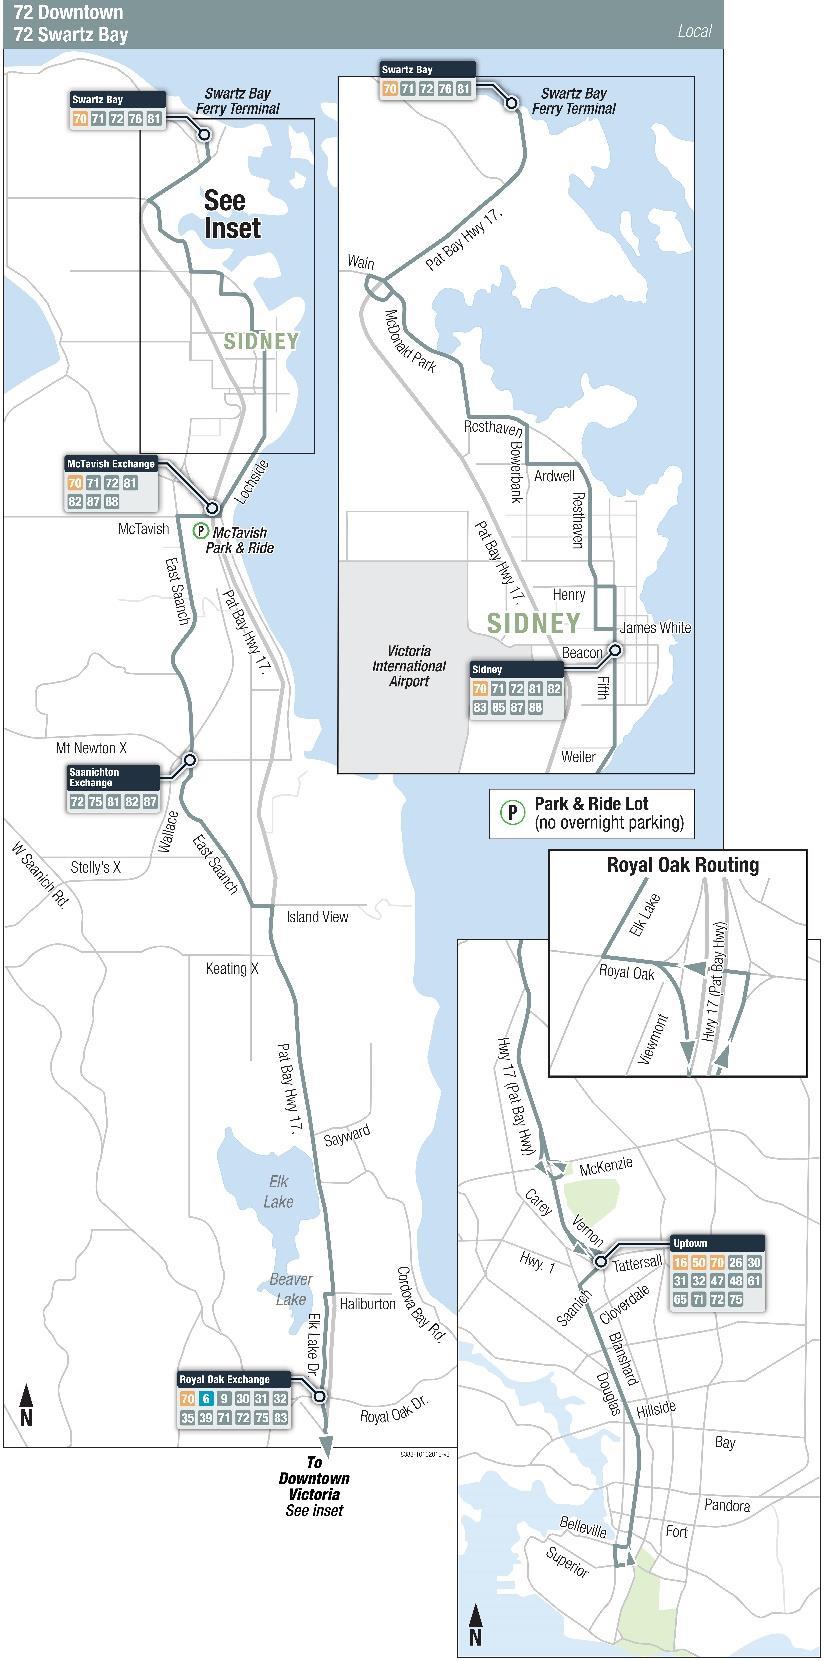 Routing Change Route 72 72 Downtown/Swartz Bay WINTER 2019 CHANGE: Effective January 2, 2019 The 72 Downtown/Swartz Bay will be re-routed onto Saanich Road.